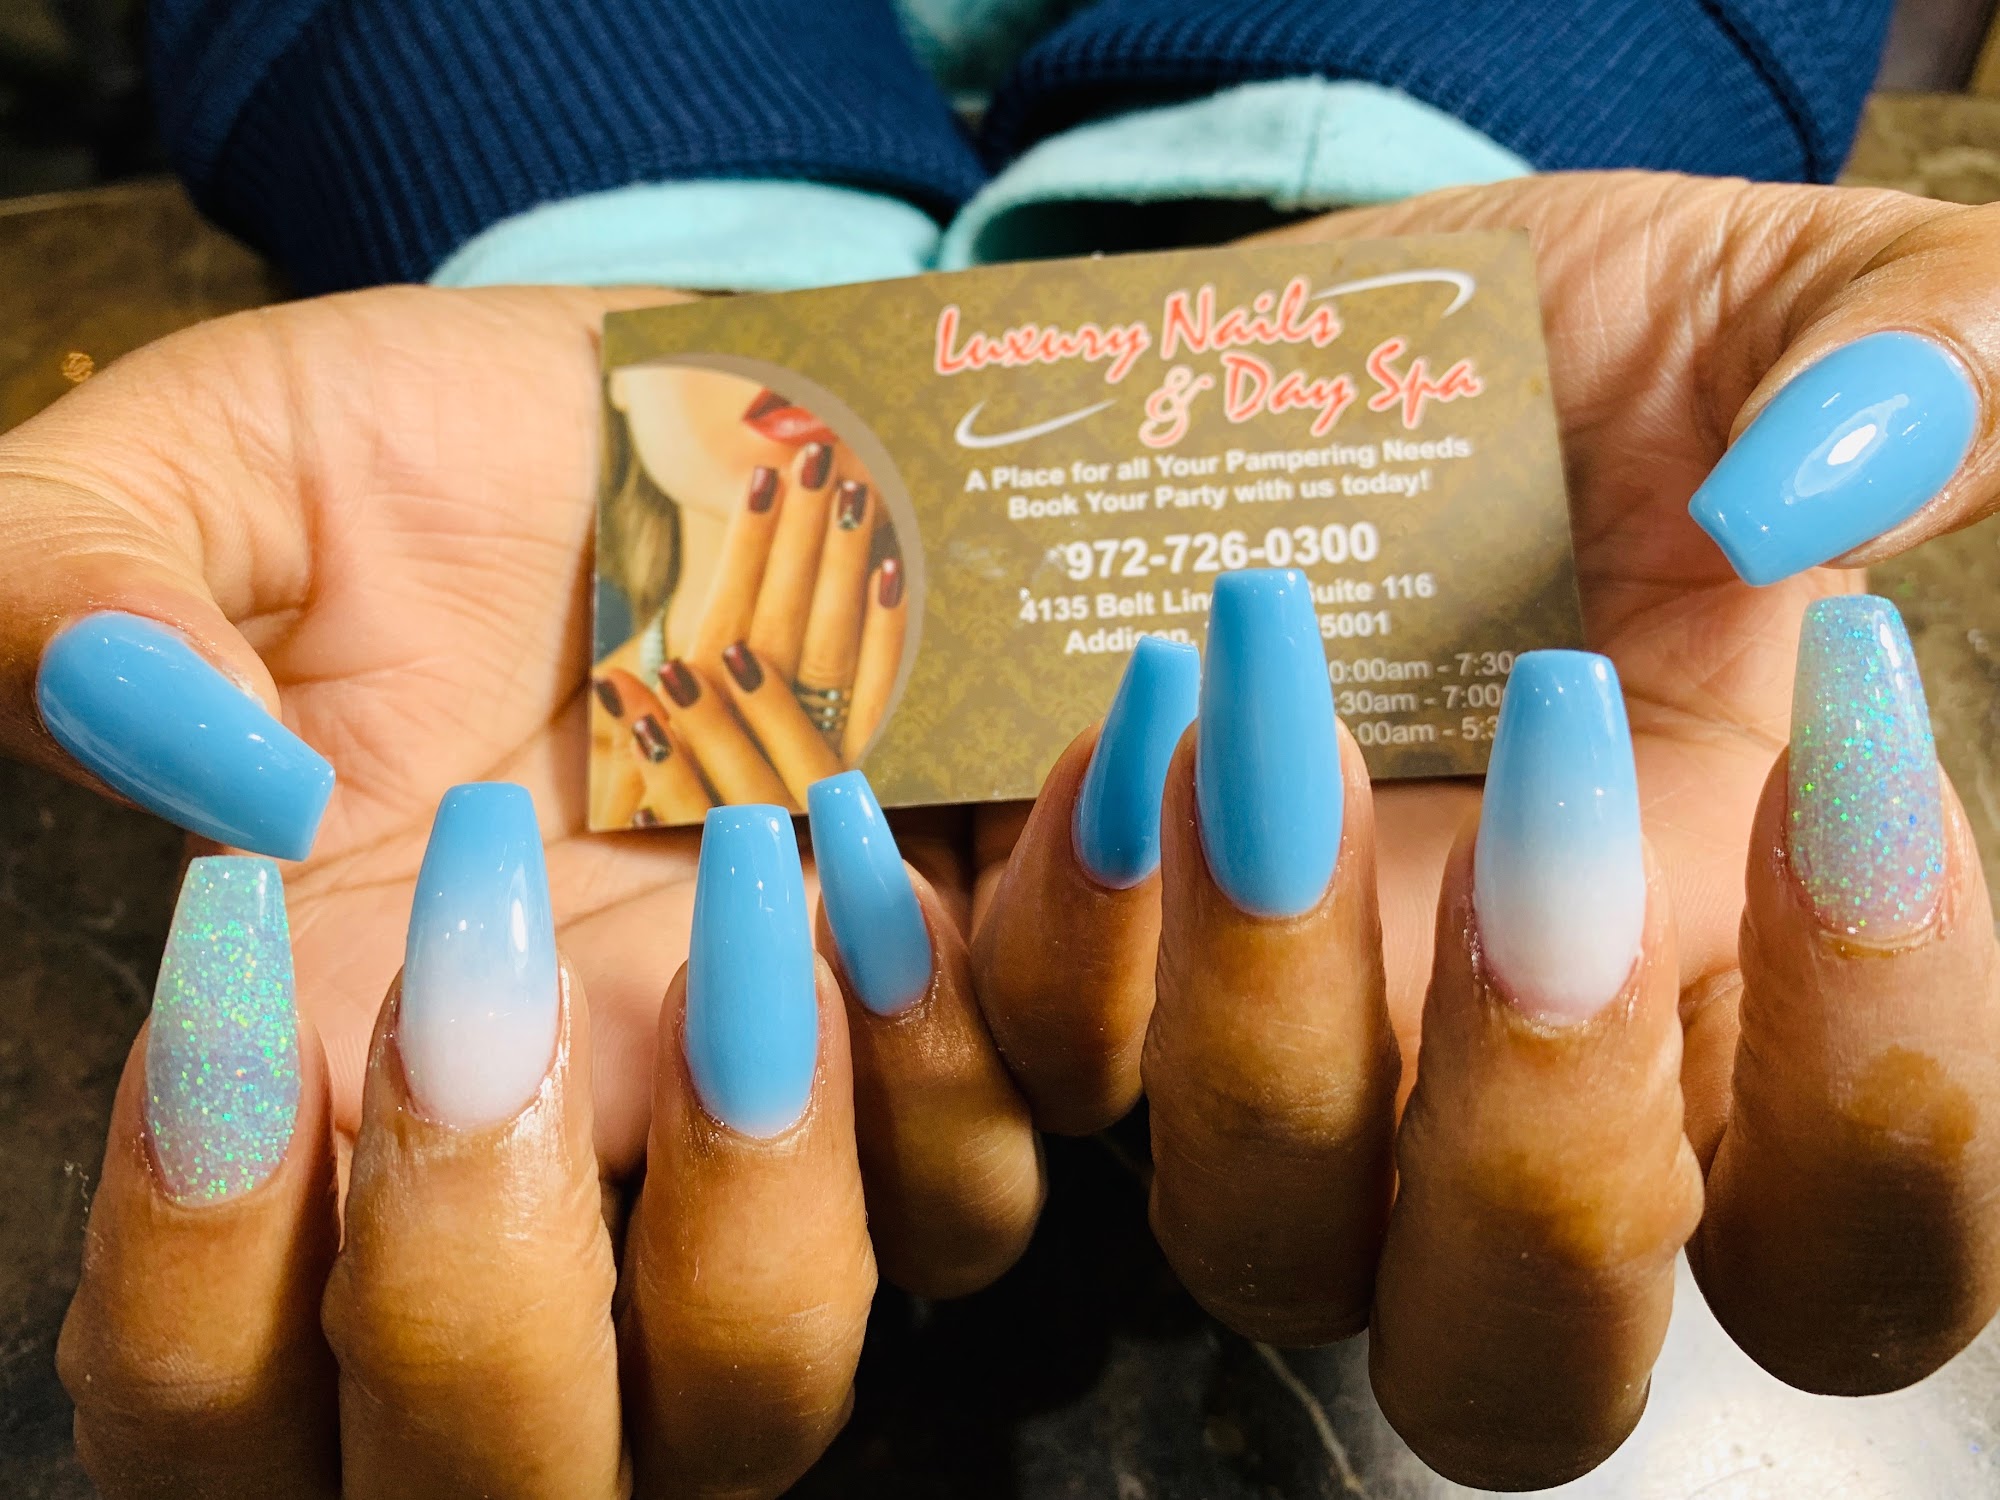 Luxury Nails & Day Spa